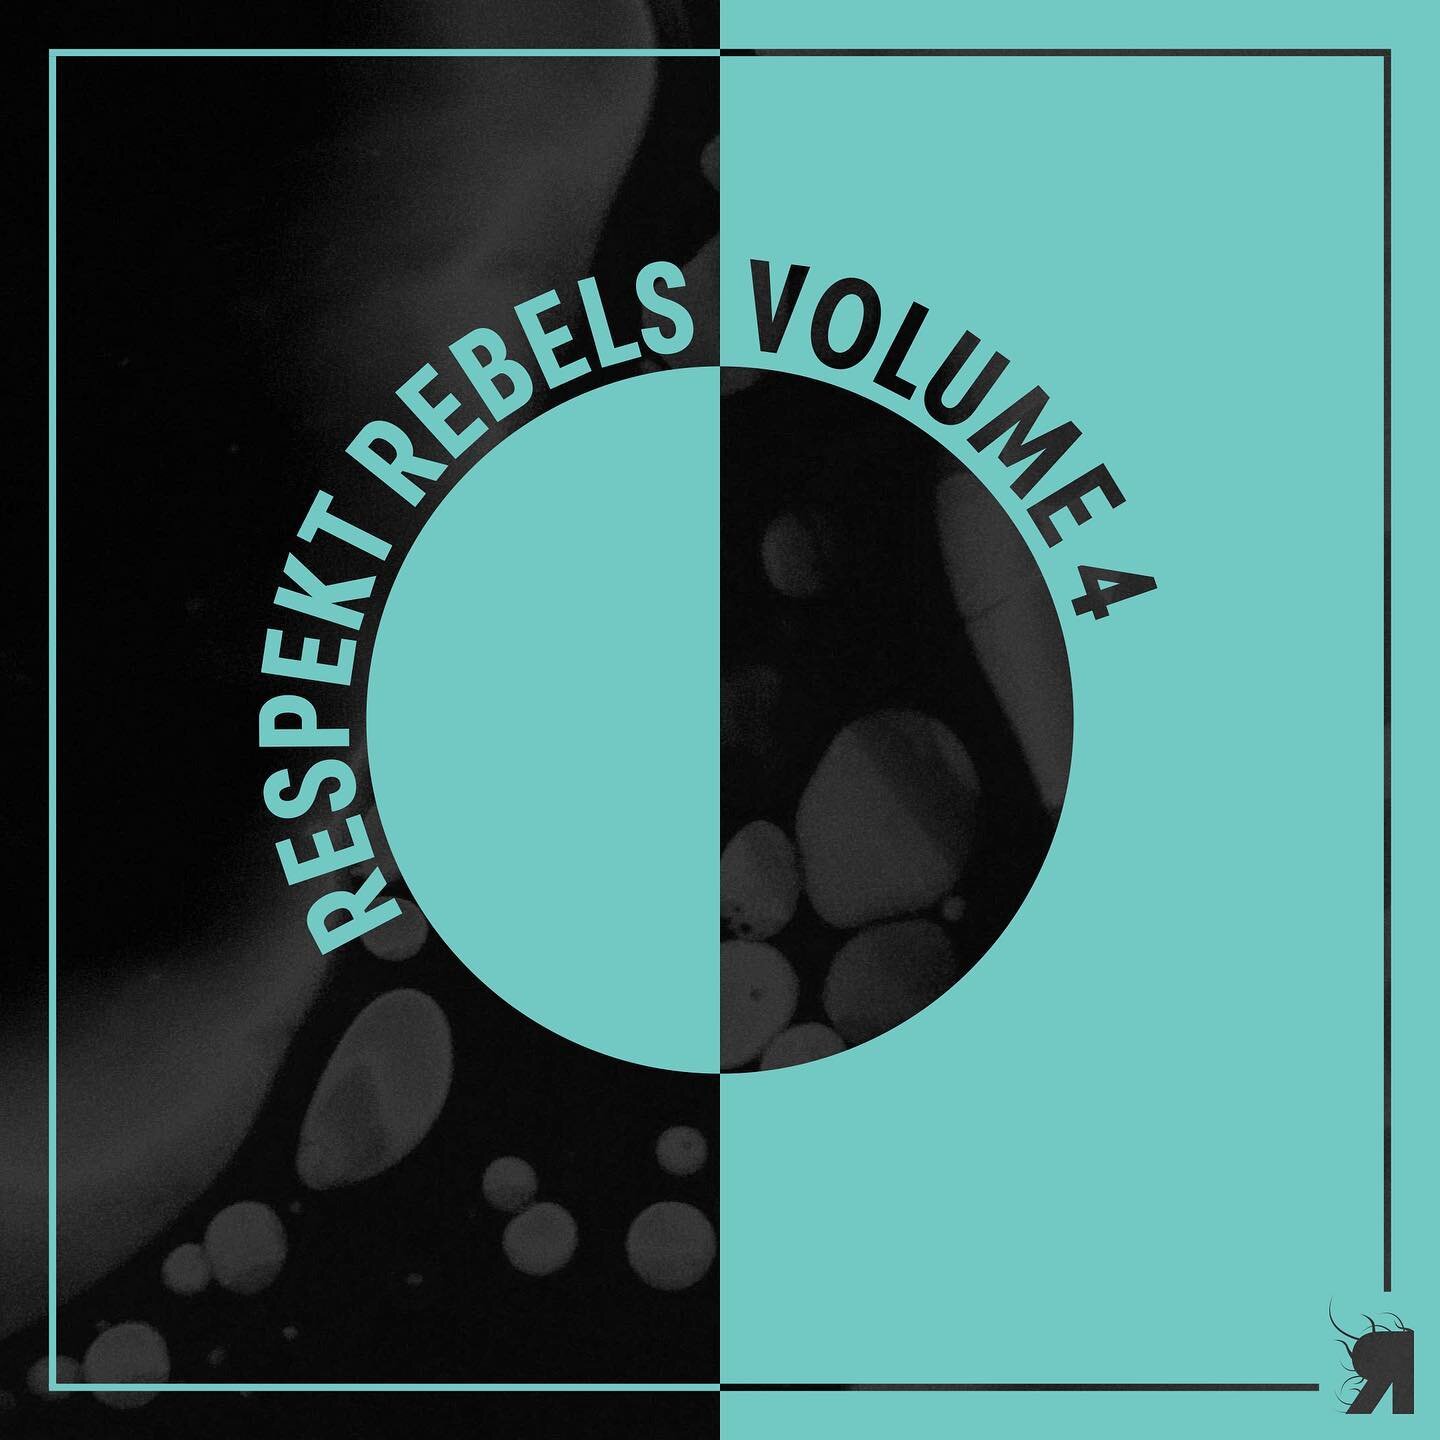 I am pleased to announce my latest @medman_uk release &ldquo;Endure&rdquo; will be coming out on Respekt Rebels vol 4 on 9.12.22 🙌 @respektrecordings #techno #technolovers #technofamily #electronicmusic #technoparty #technoliverpool